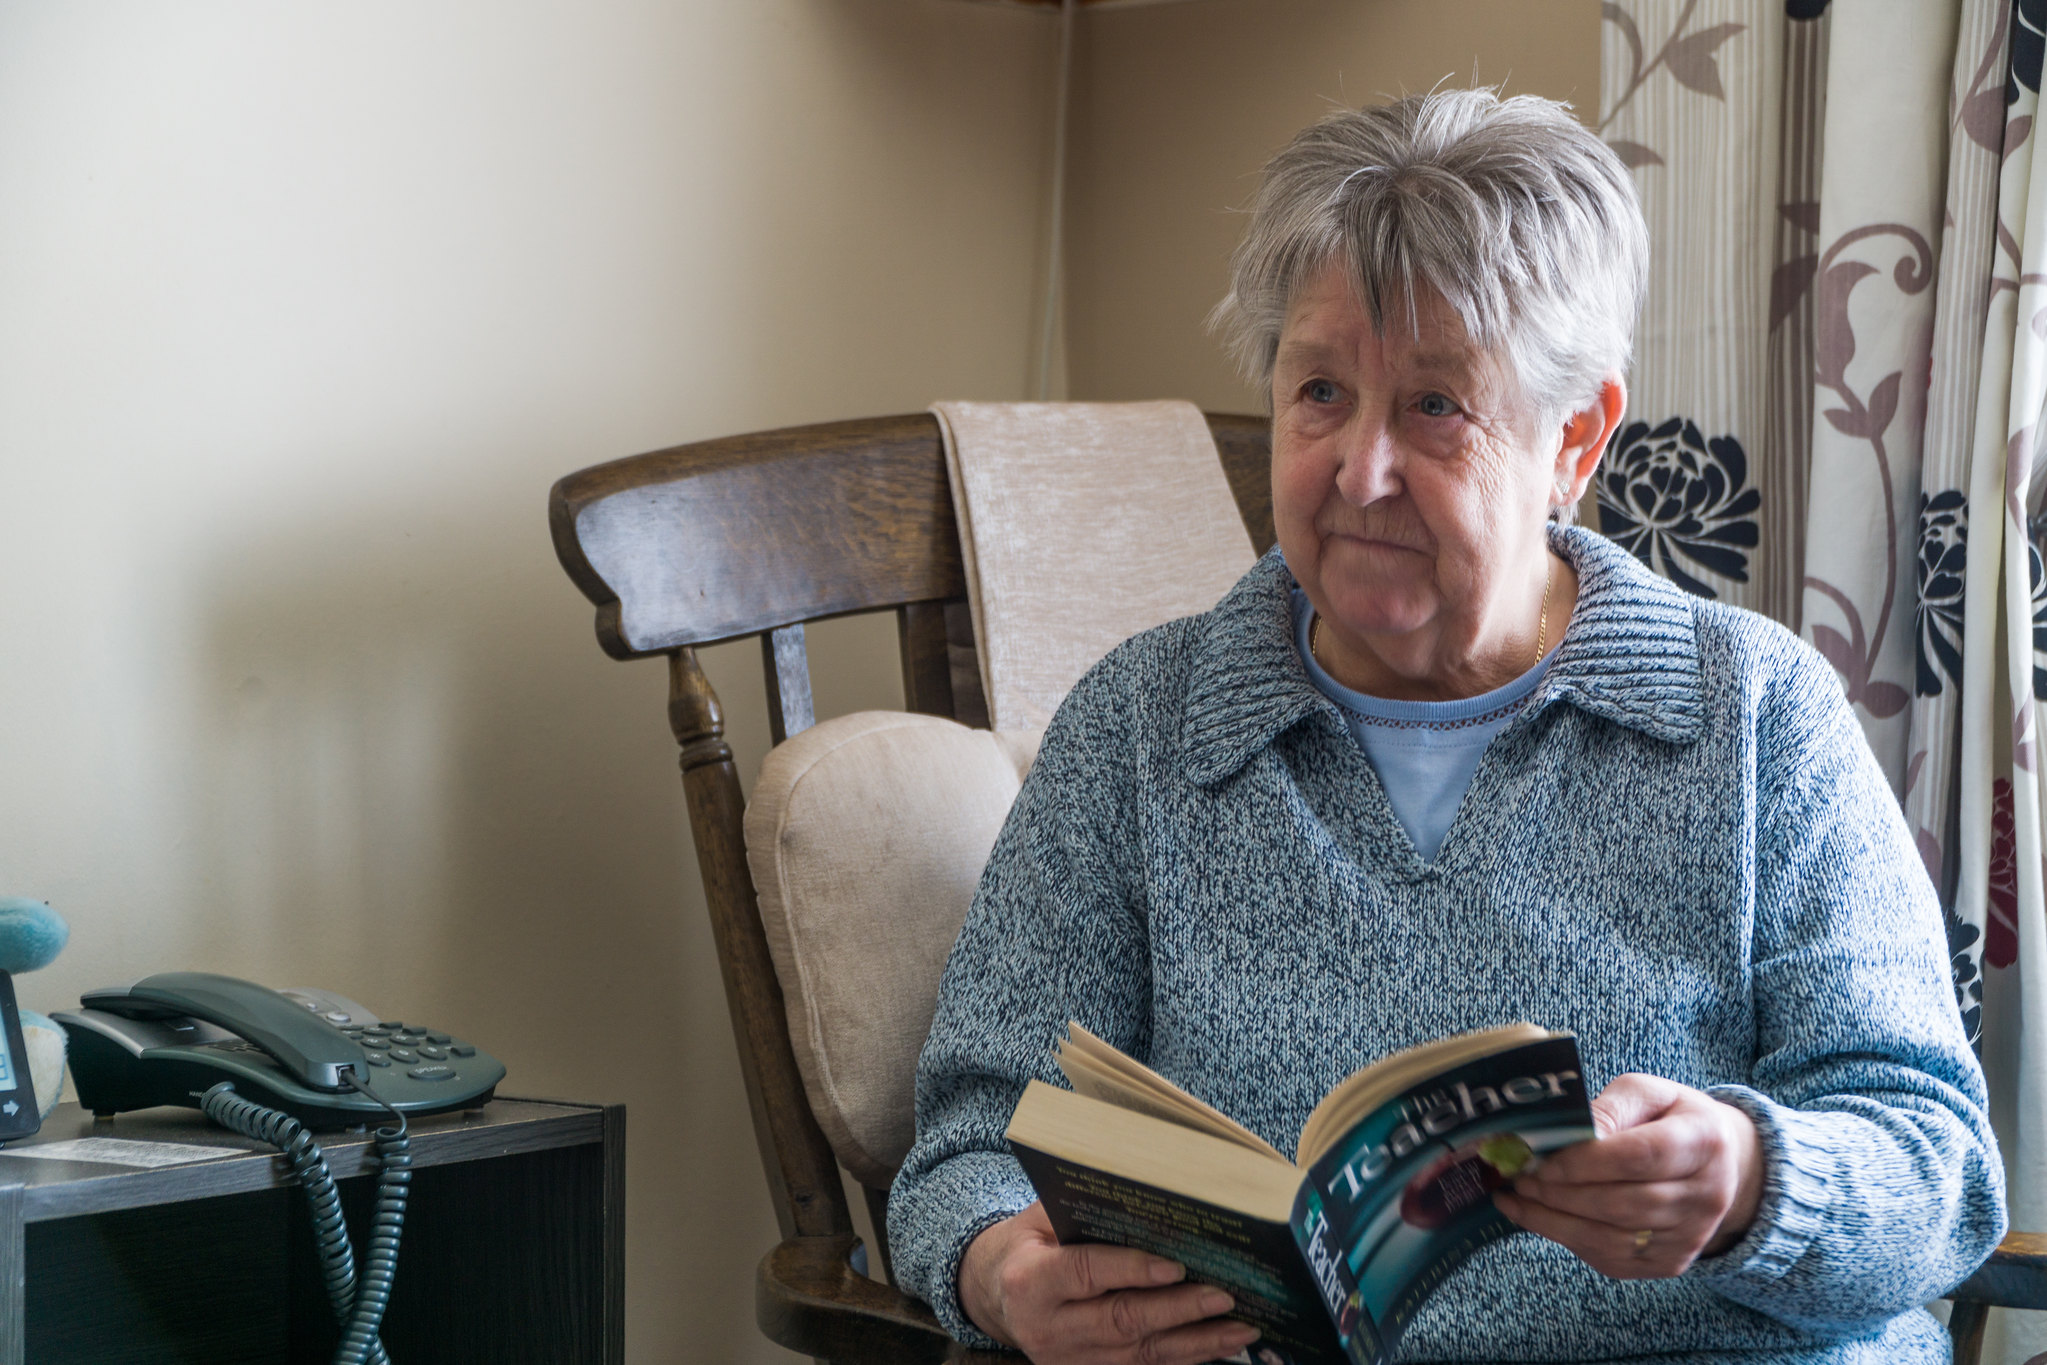 A woman sits in a chair reading a book to someone out of shot